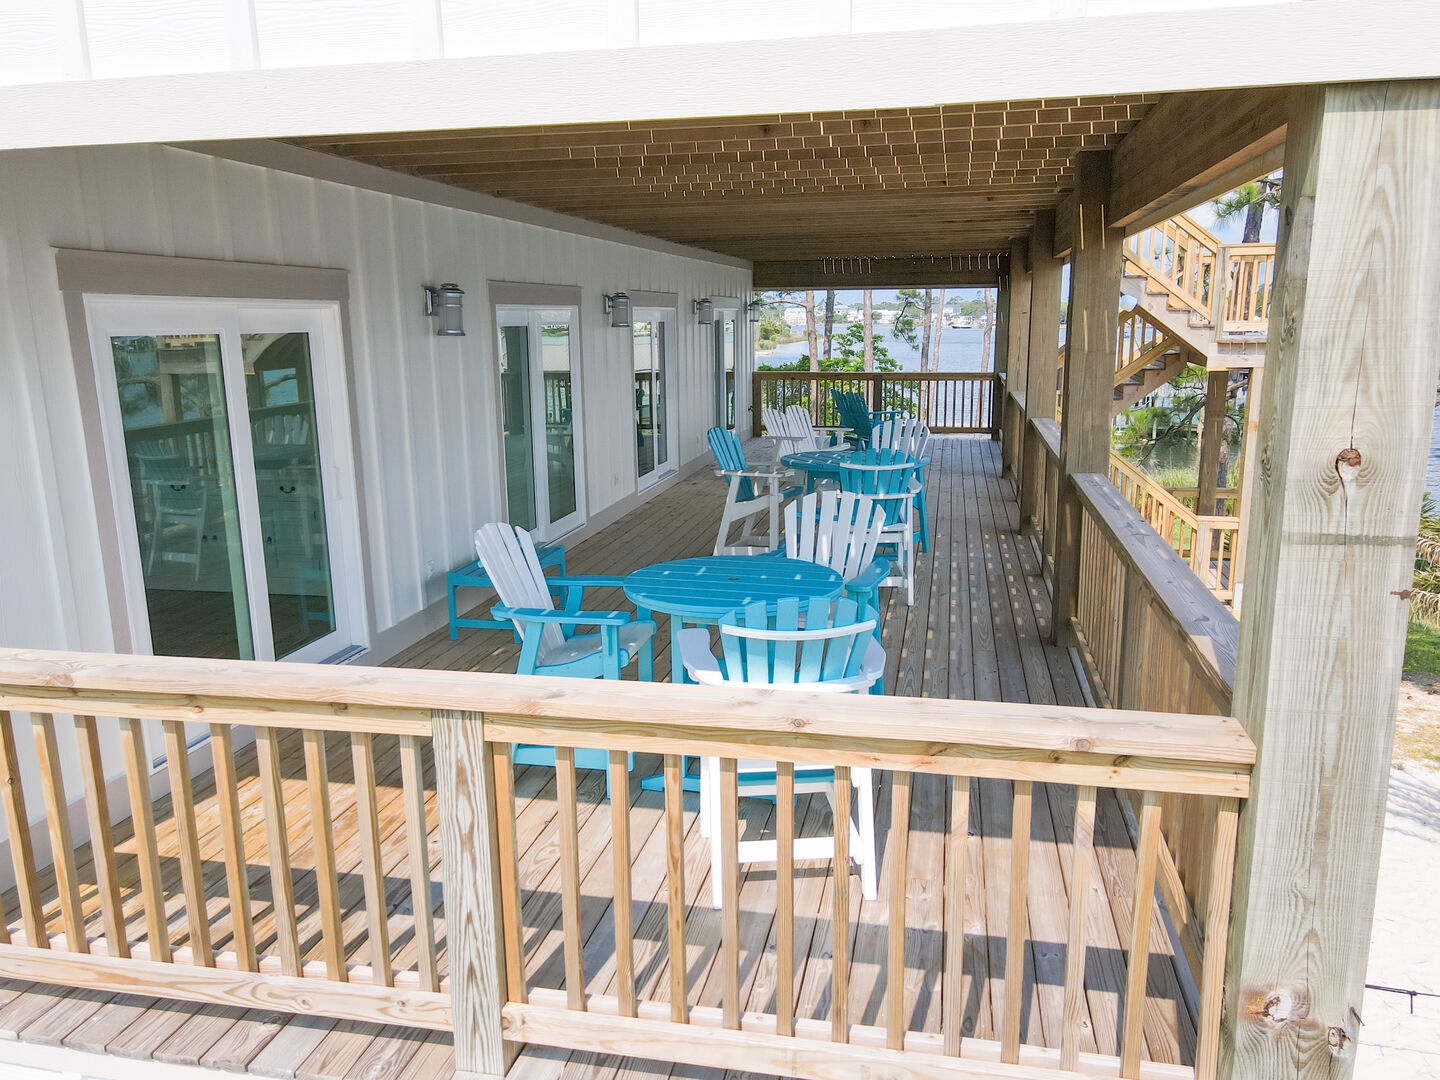 The second level deck provides several bistro tables and chairs with great views of the Bayou